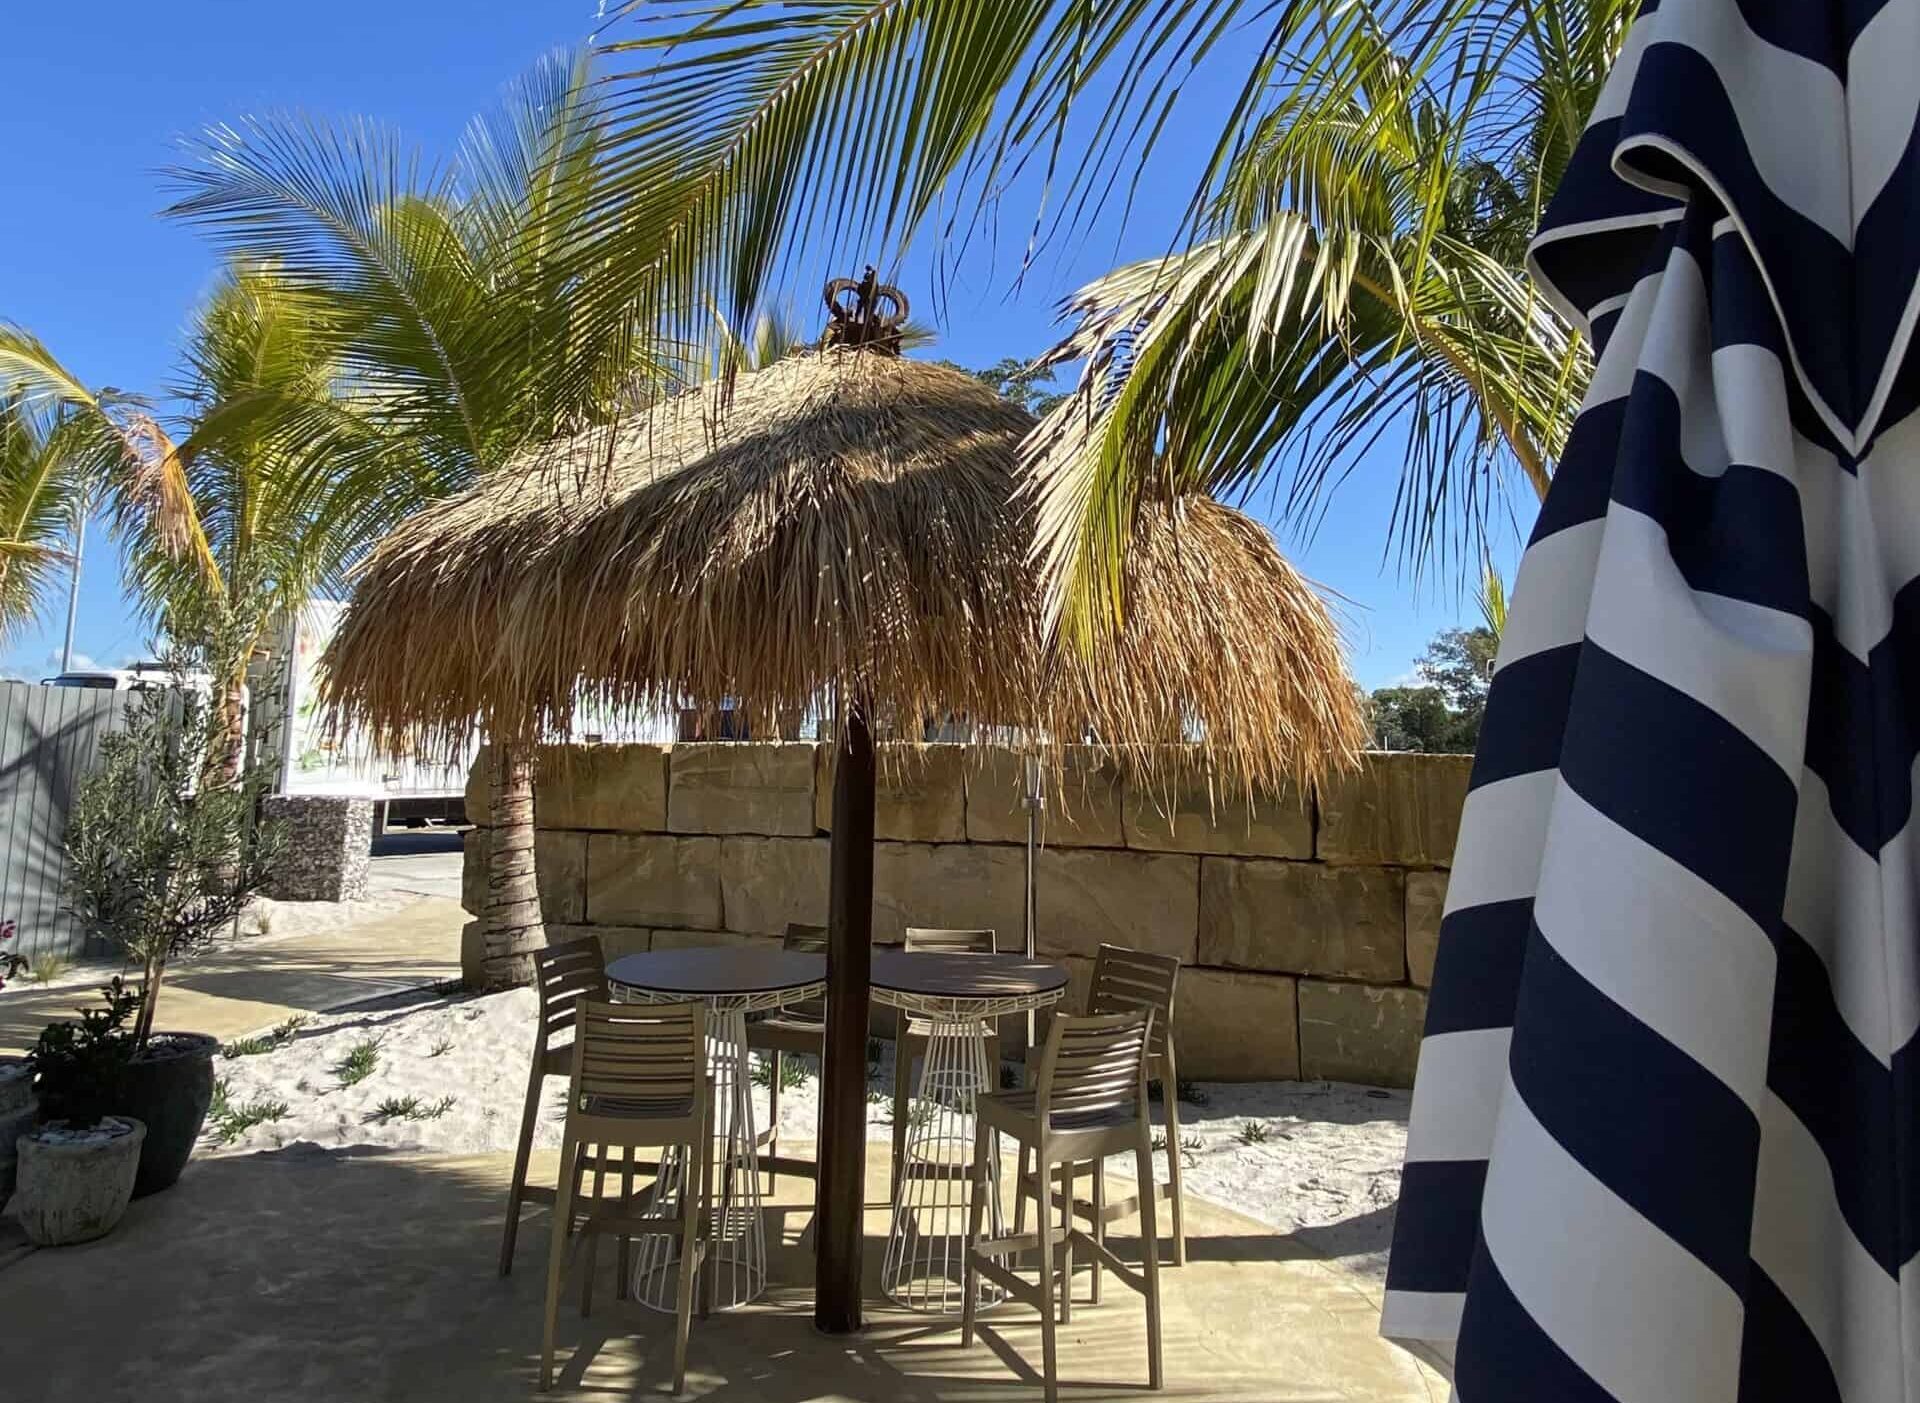 A quality thatched umbrella providing shade to an outdoor dining area on the Sunshine coast.